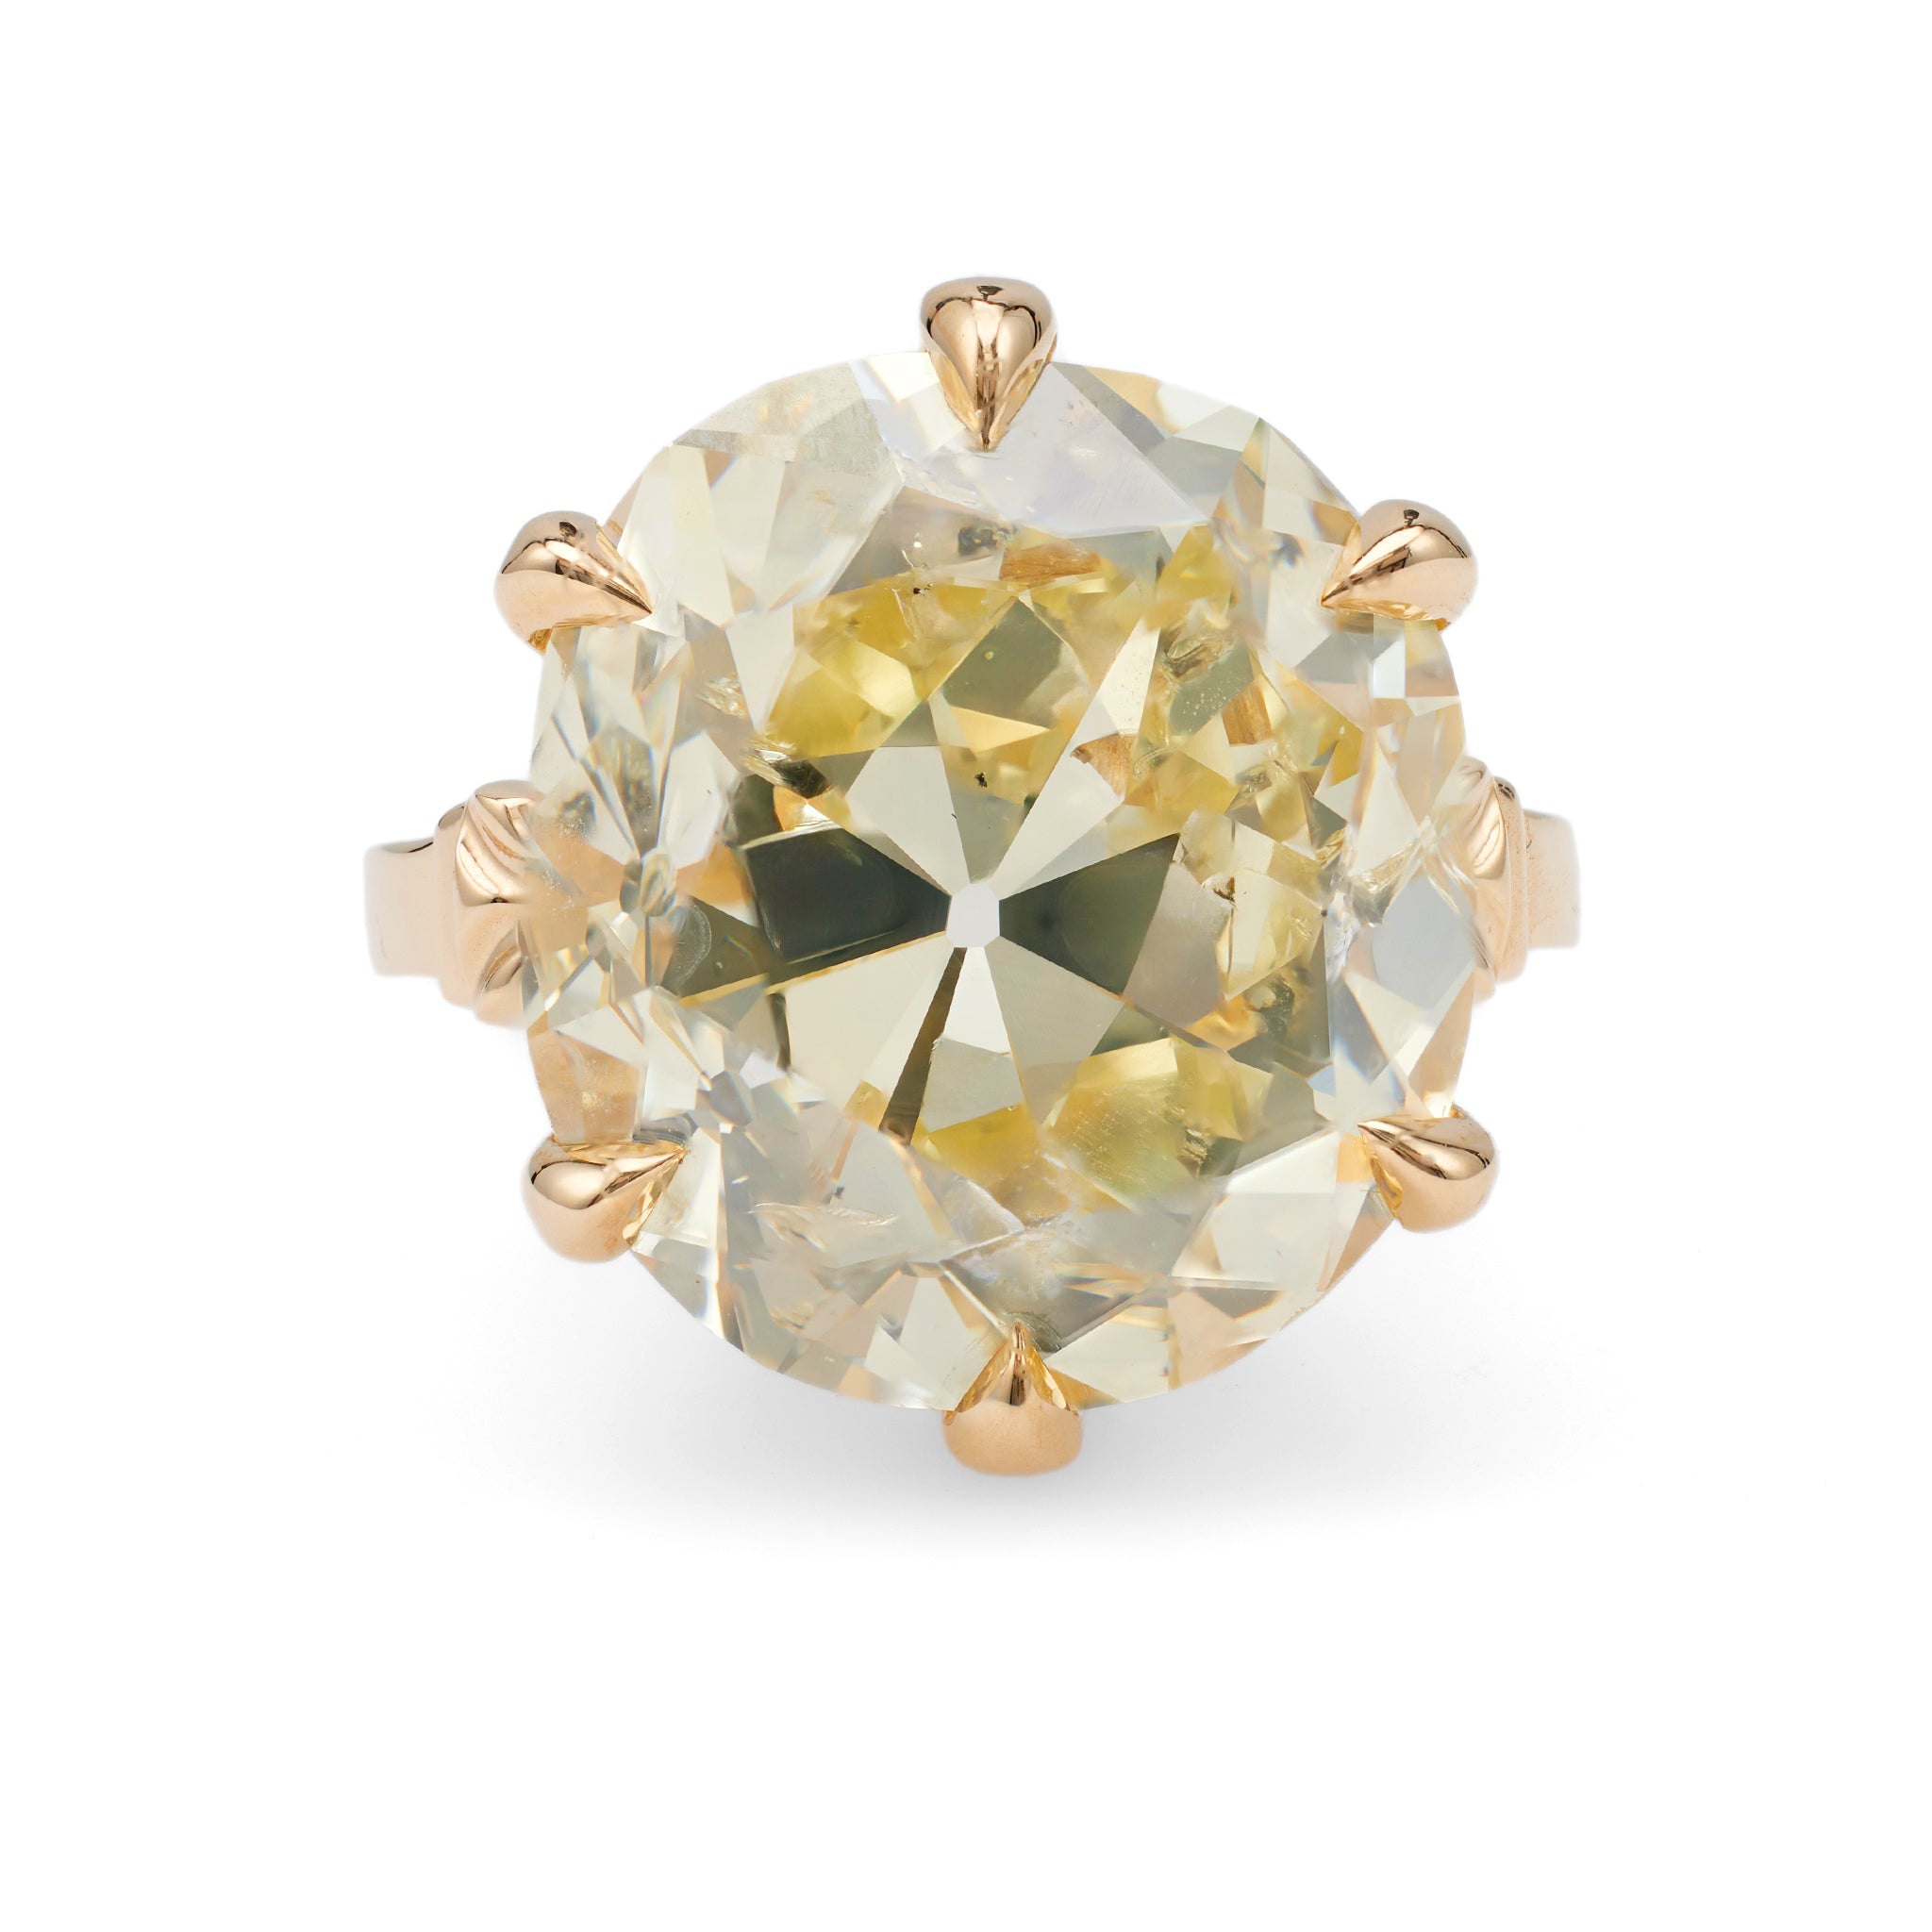 Edwardian GIA 15.77 Carat Old Mine Cut Diamond 14k Yellow Gold Solitaire Ring Rings Jack Weir & Sons   